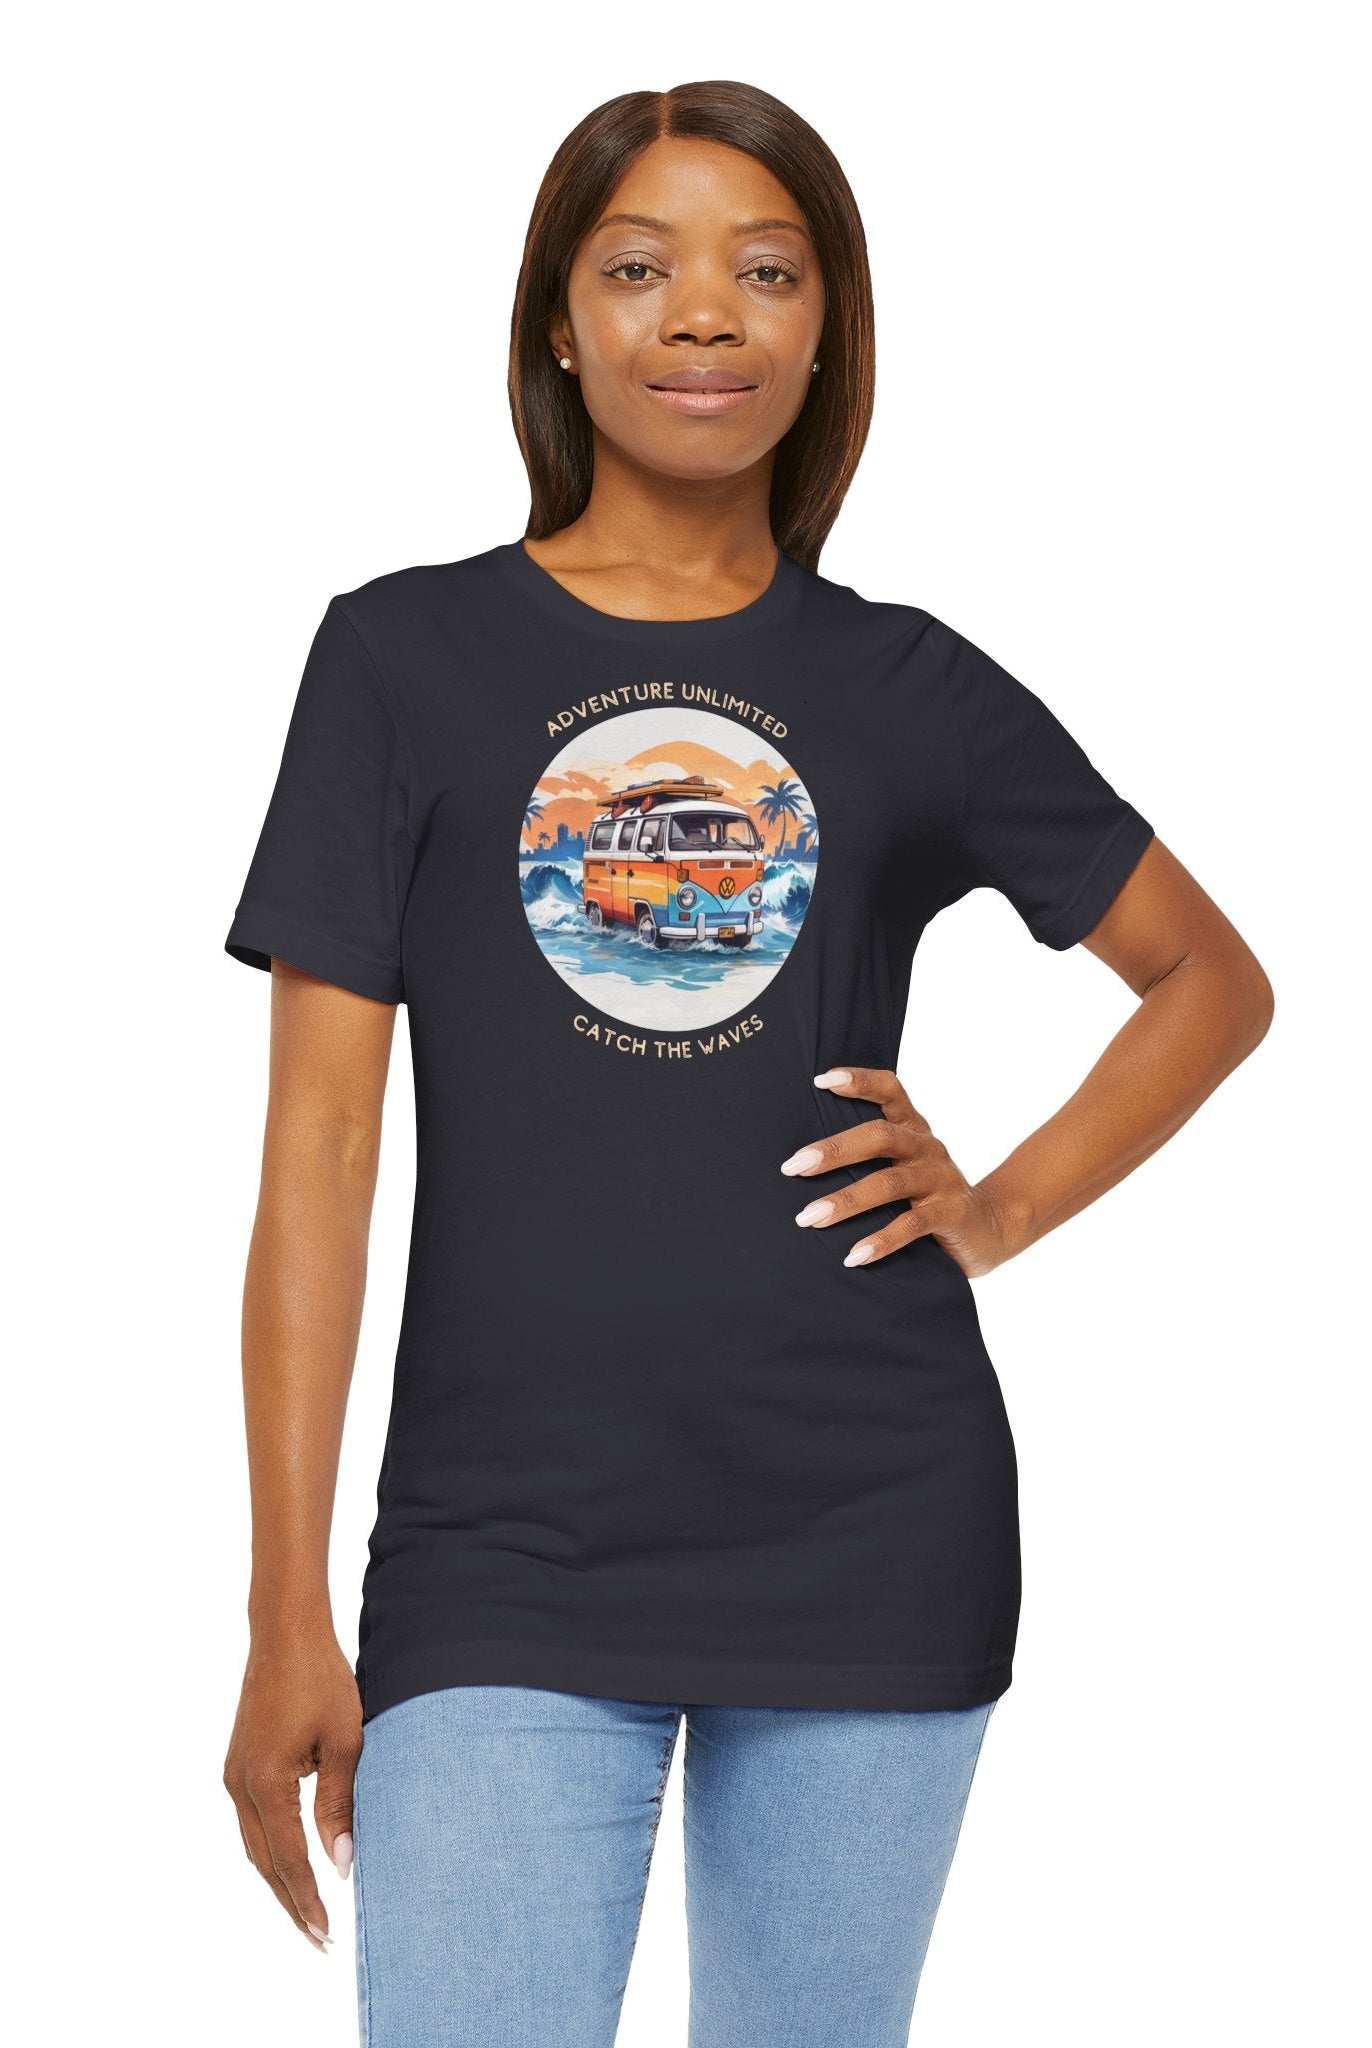 Adventure Unlimited Surfing T-Shirt - Woman in printed black ’I’m’ tee - Bella & Canvas EU